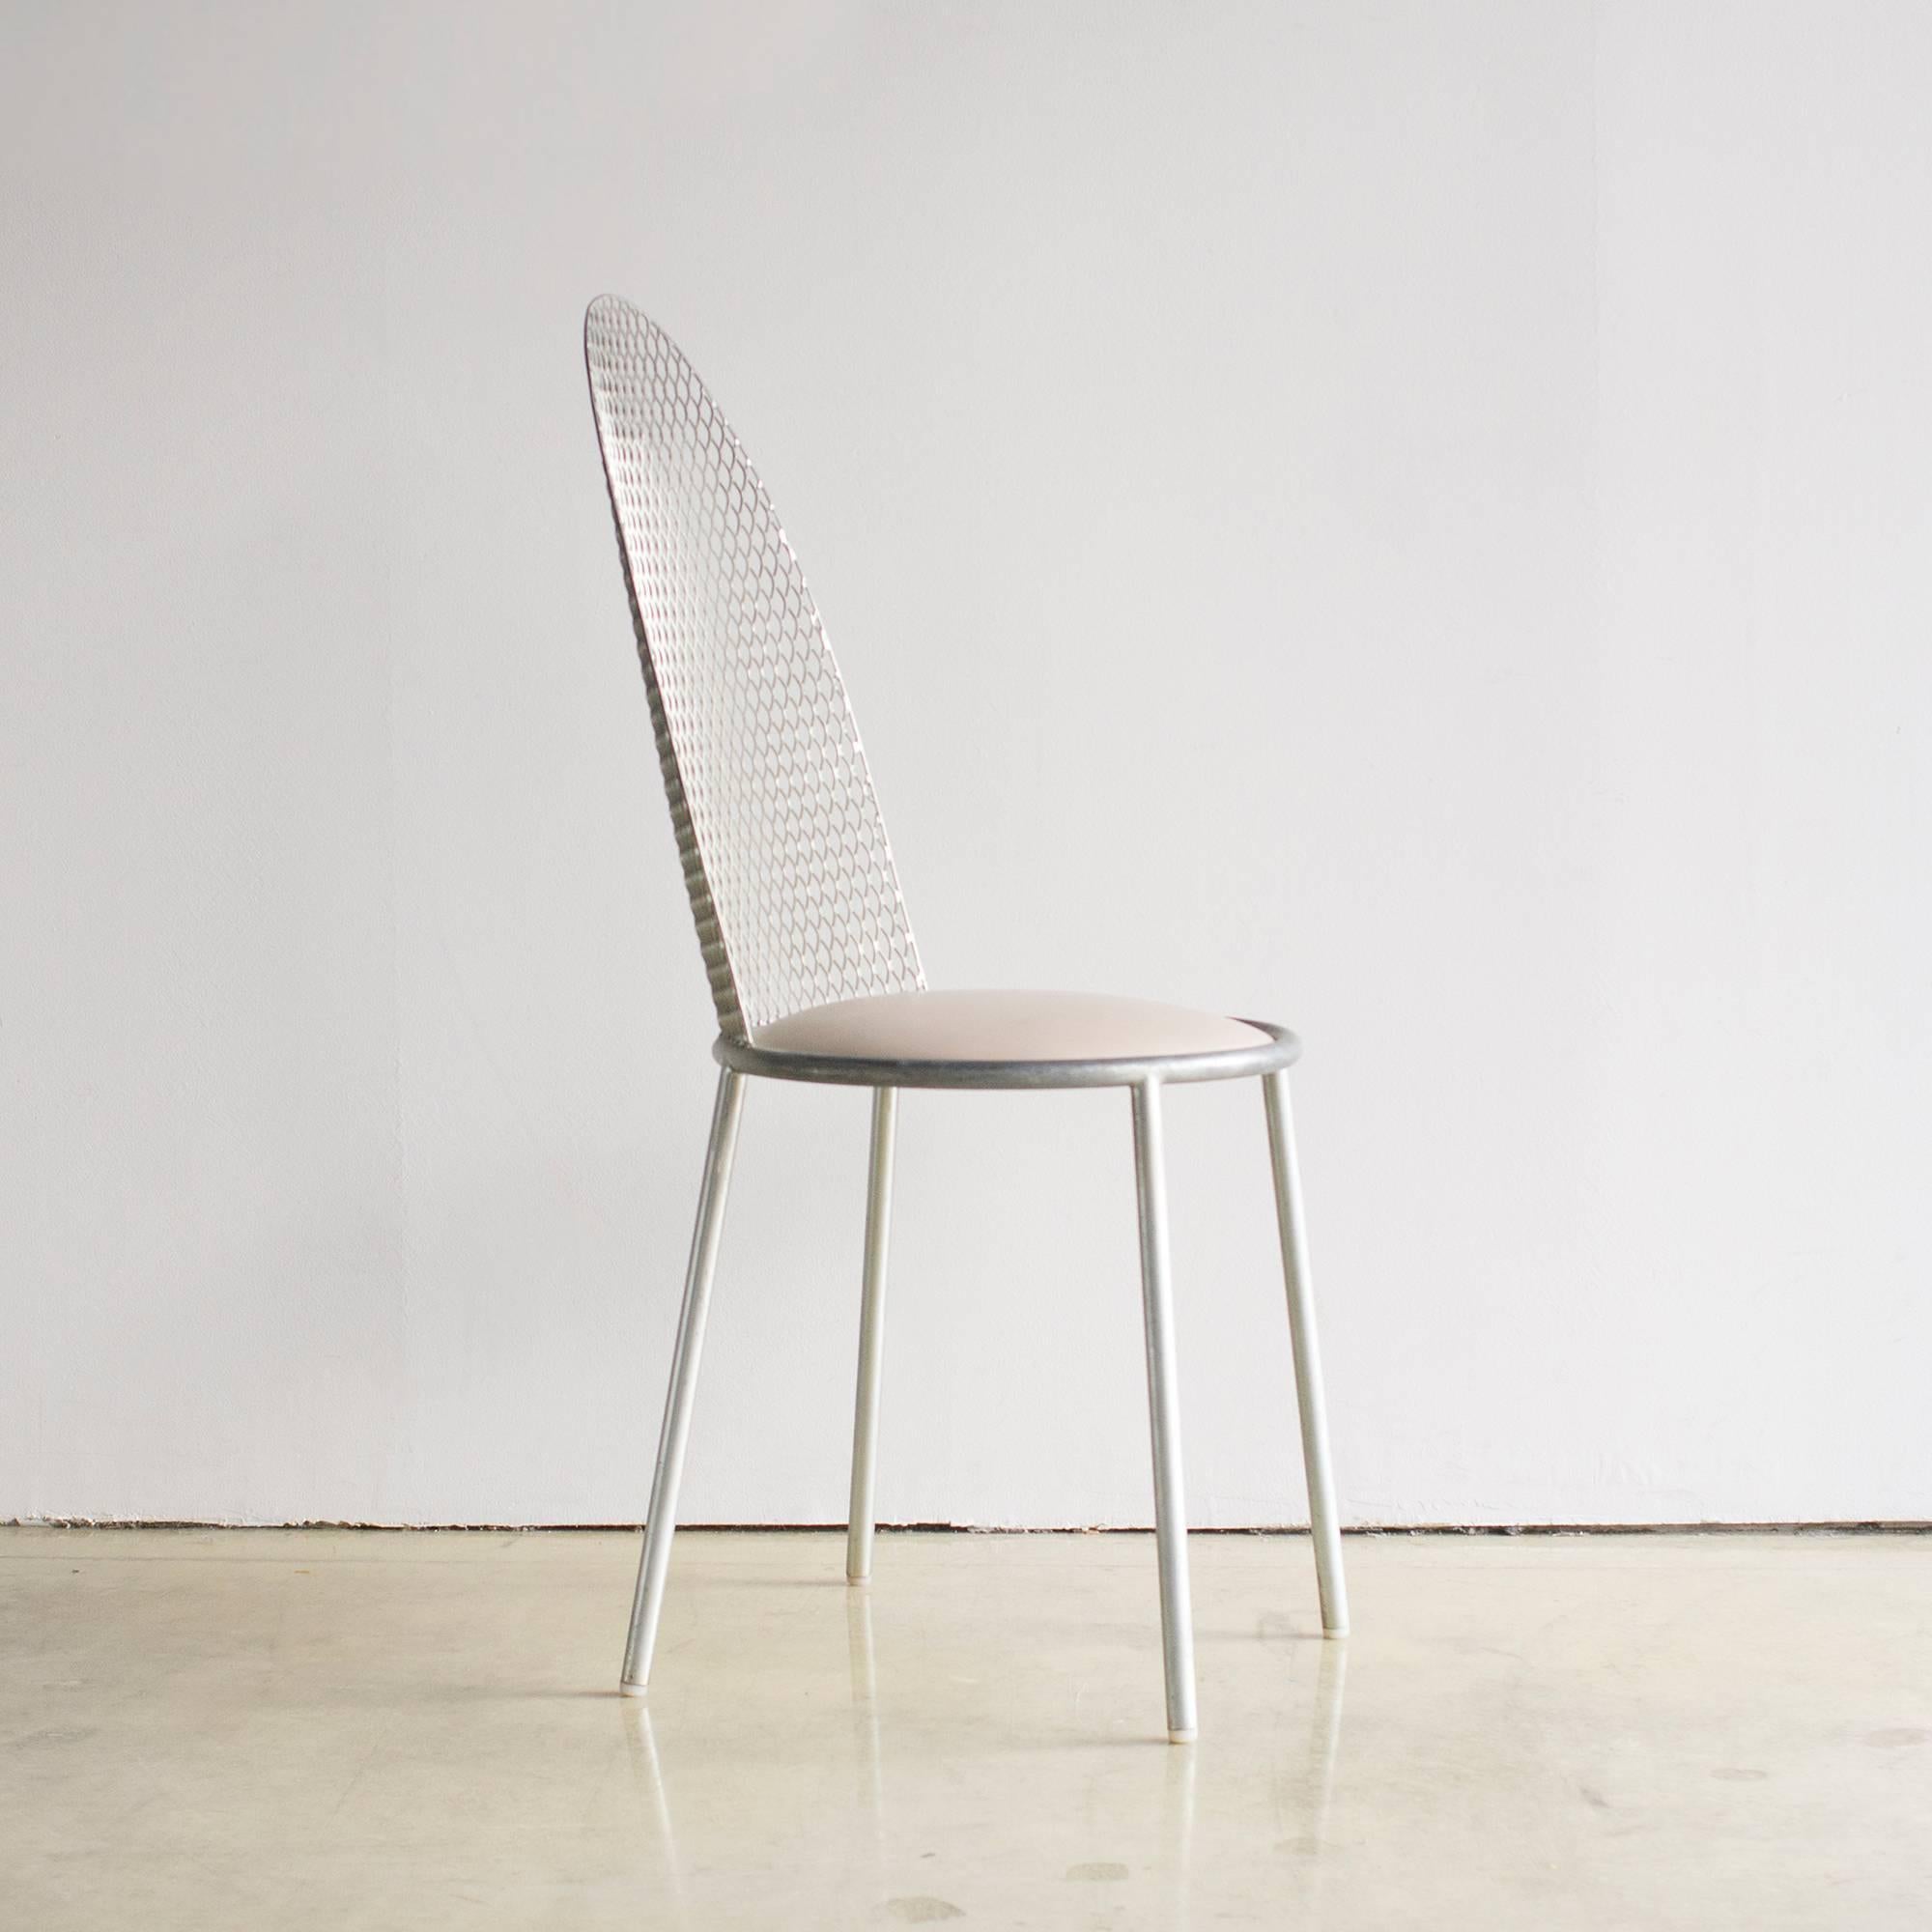 HAL2 chair designed by Shiro Kuramata for Cassina Inderdecor in 1987.
Vinyl seat and expand metal back.